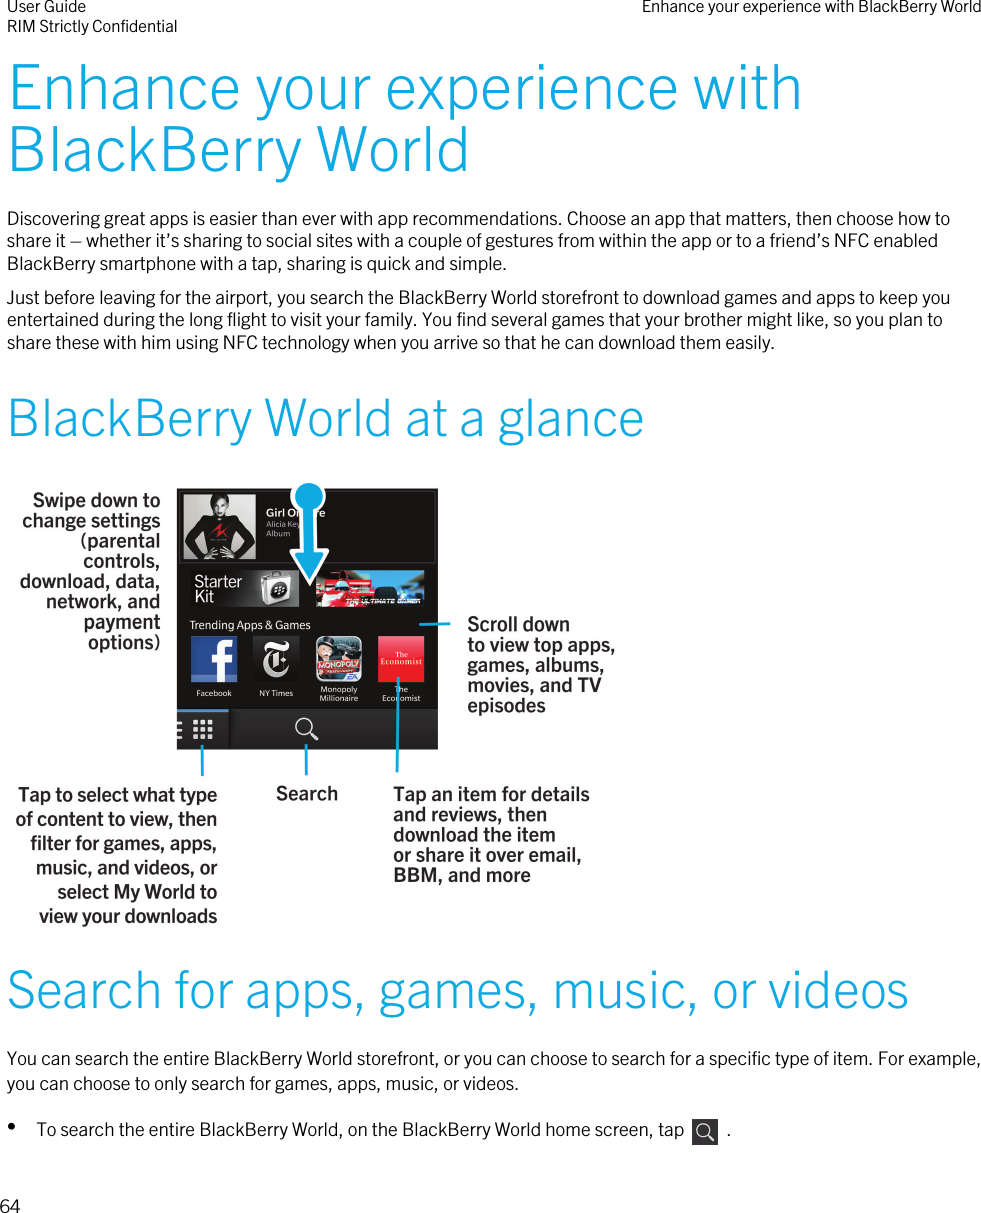 Enhance your experience withBlackBerry WorldDiscovering great apps is easier than ever with app recommendations. Choose an app that matters, then choose how toshare it – whether it’s sharing to social sites with a couple of gestures from within the app or to a friend’s NFC enabledBlackBerry smartphone with a tap, sharing is quick and simple.Just before leaving for the airport, you search the BlackBerry World storefront to download games and apps to keep youentertained during the long flight to visit your family. You find several games that your brother might like, so you plan toshare these with him using NFC technology when you arrive so that he can download them easily.BlackBerry World at a glance Search for apps, games, music, or videosYou can search the entire BlackBerry World storefront, or you can choose to search for a specific type of item. For example,you can choose to only search for games, apps, music, or videos.•To search the entire BlackBerry World, on the BlackBerry World home screen, tap    .User GuideRIM Strictly Confidential Enhance your experience with BlackBerry World64